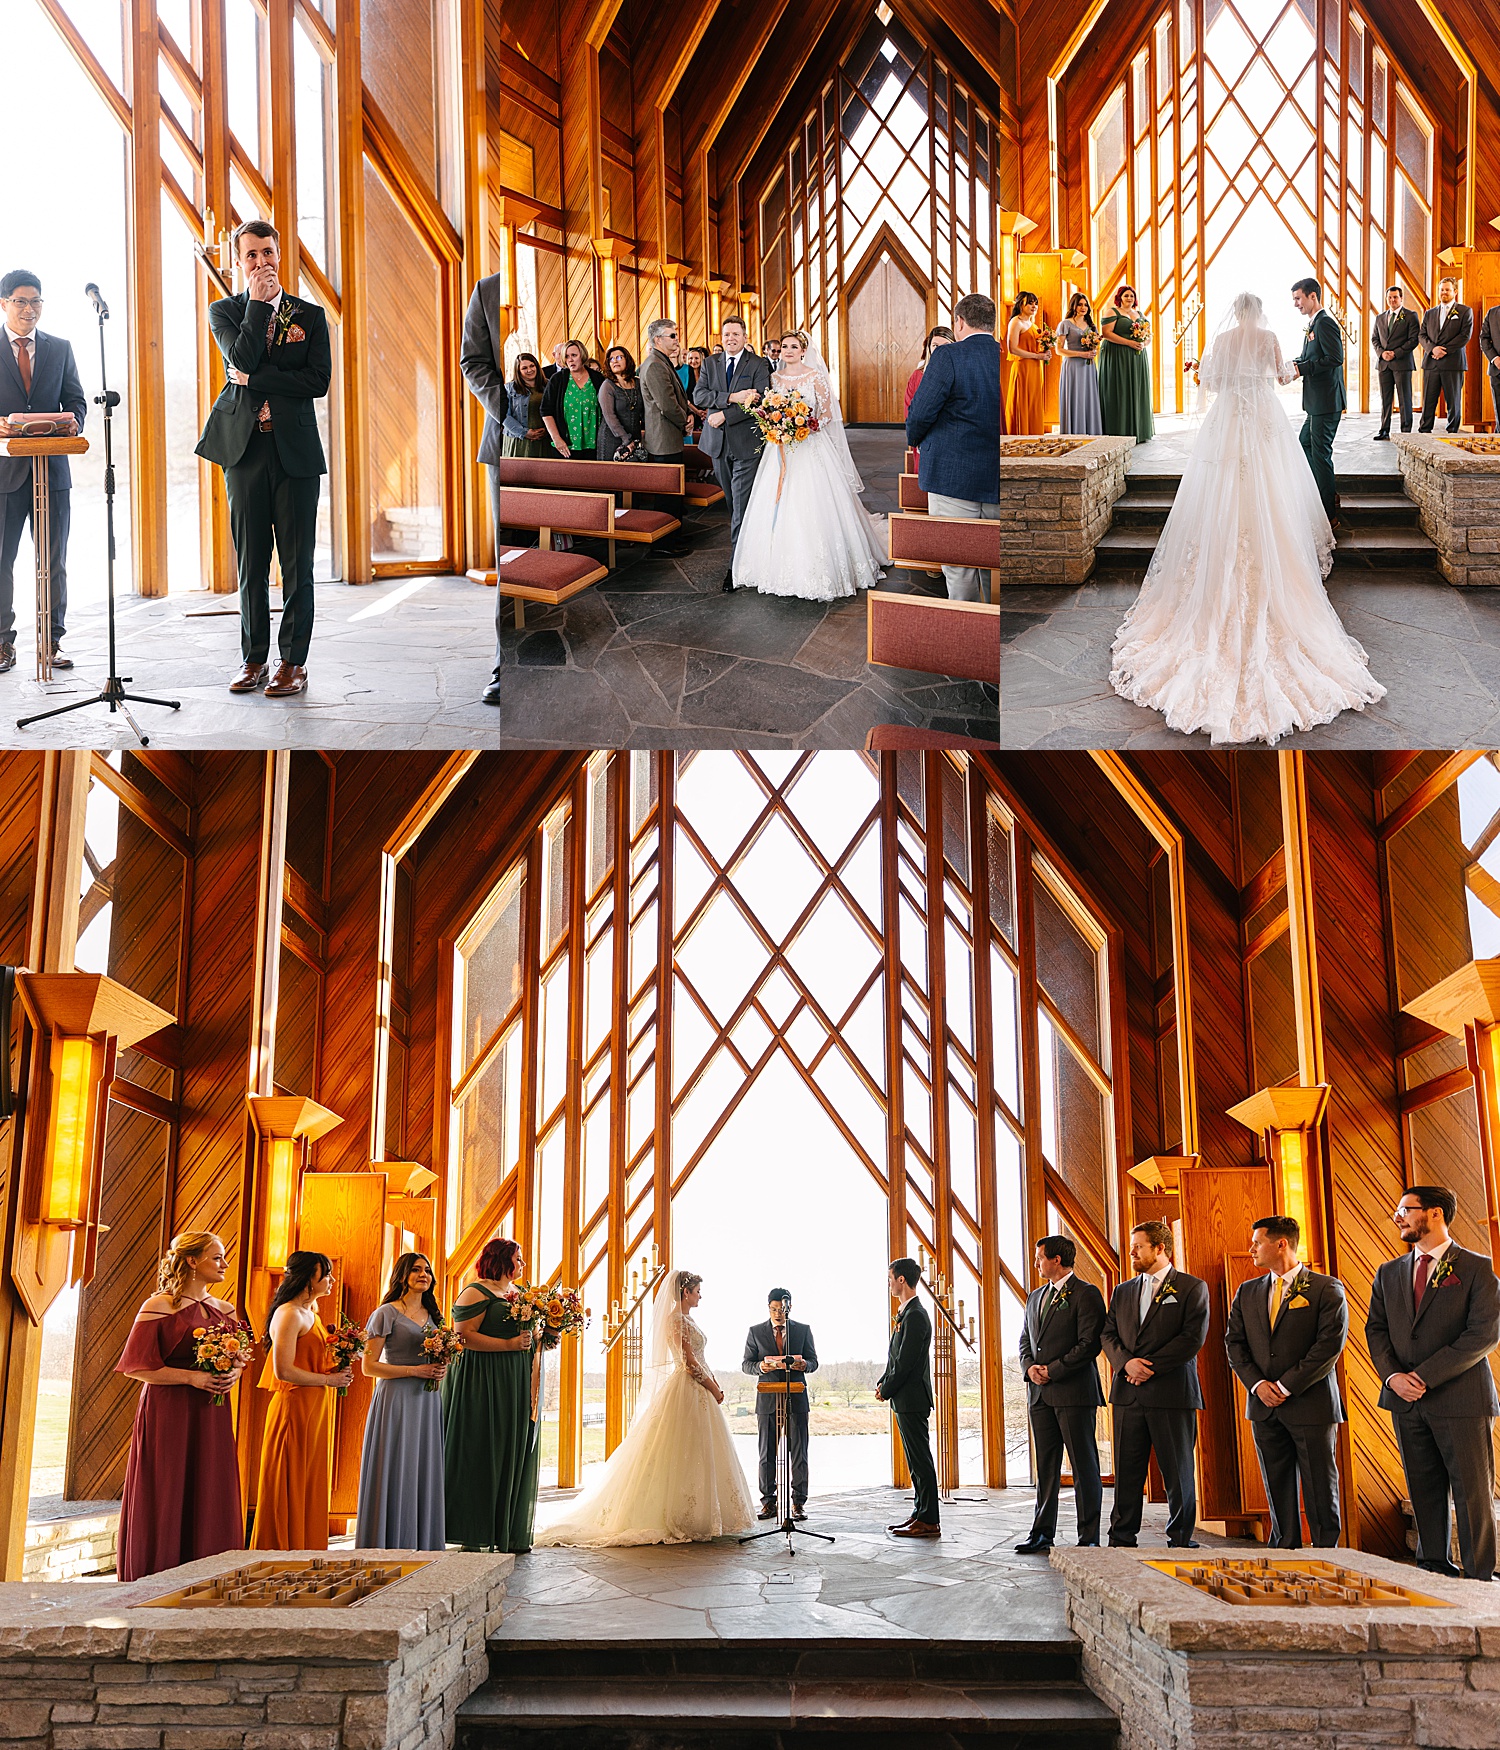 ceremony at Powell Gardens with stain glass windows and a wedding party during the ceremony 